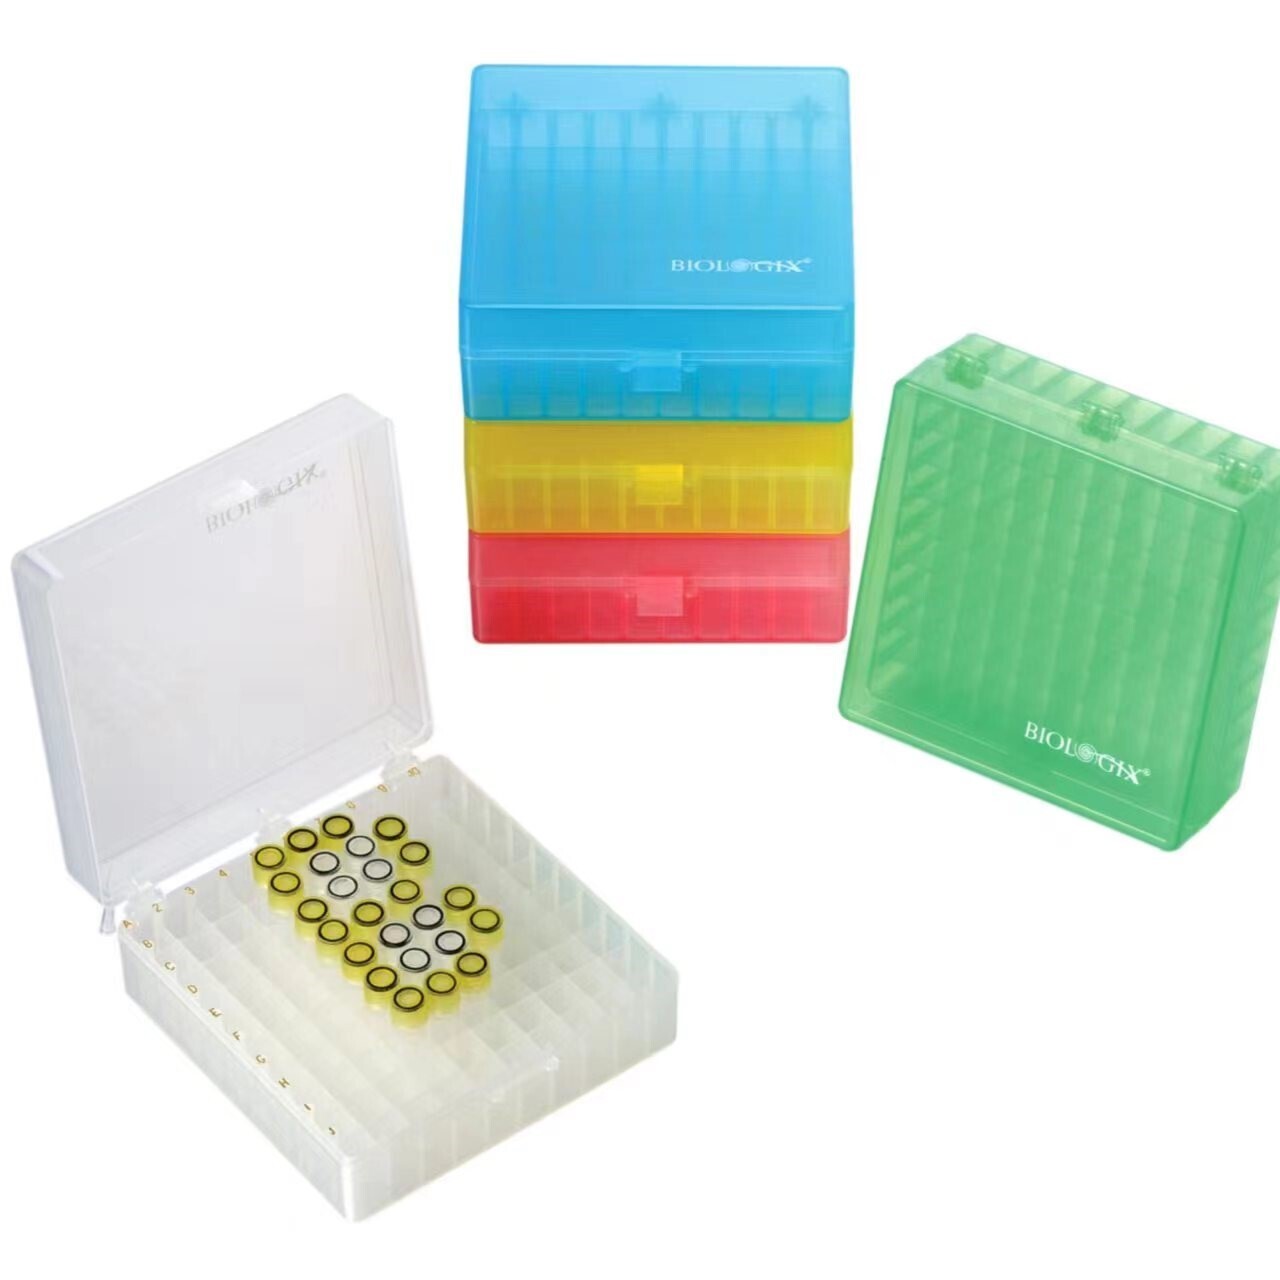 CryoKING PP Cryogenic Boxes (2in. 100-Well, Assorted Colors), 5 Pieces/Pack, 4 Packs/Case